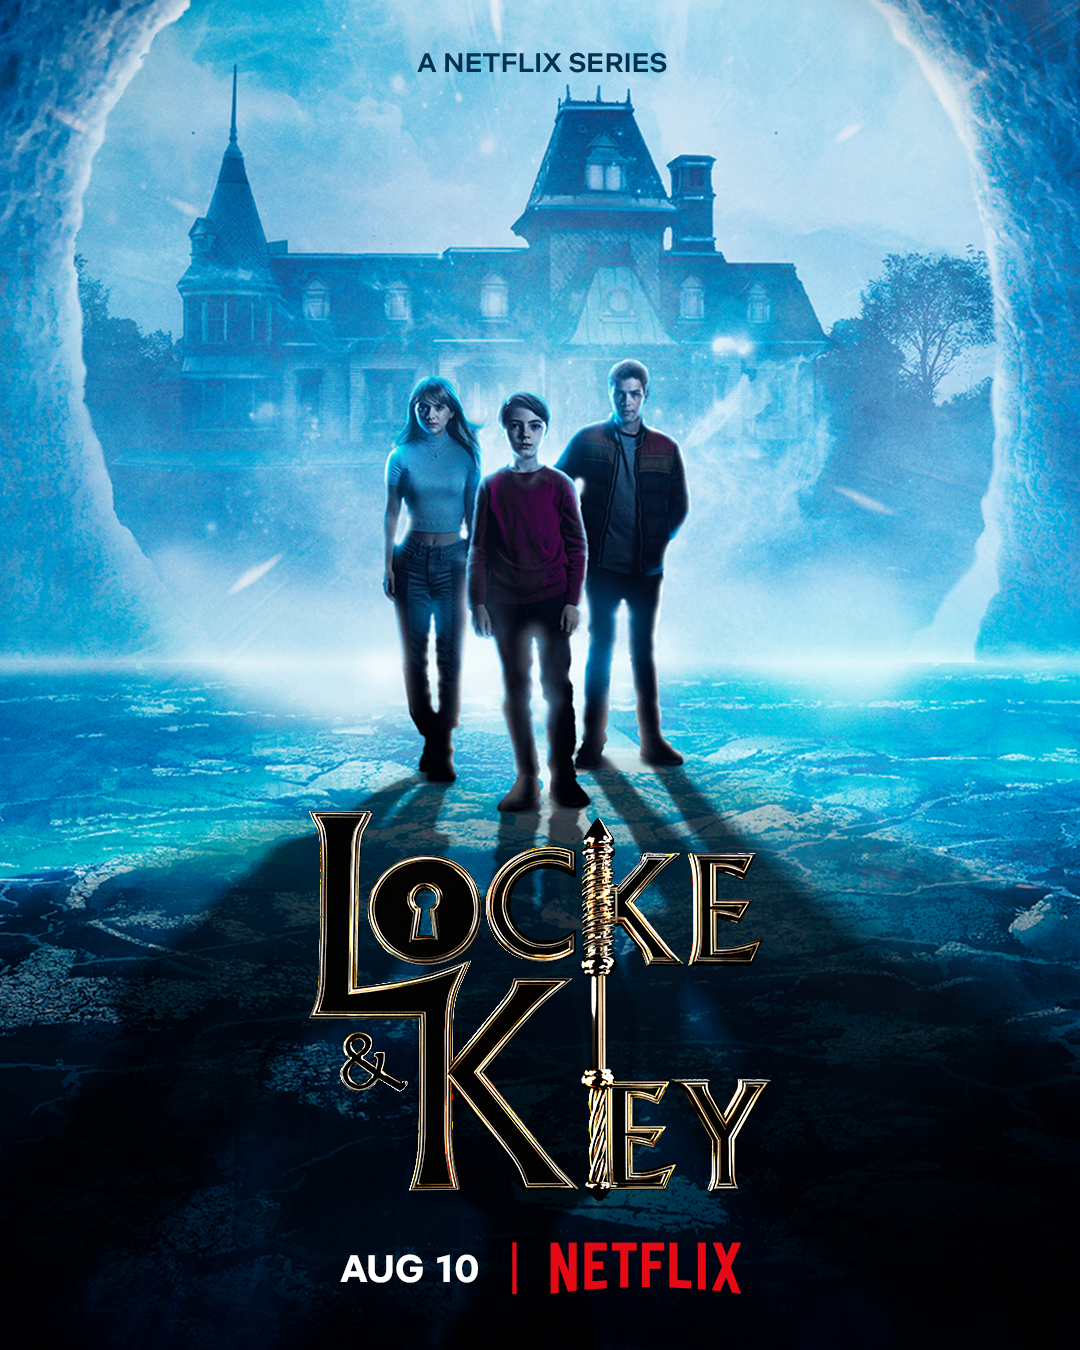 Key art for Locke & Key's final season featuring the Locke children with Keyhouse in the background